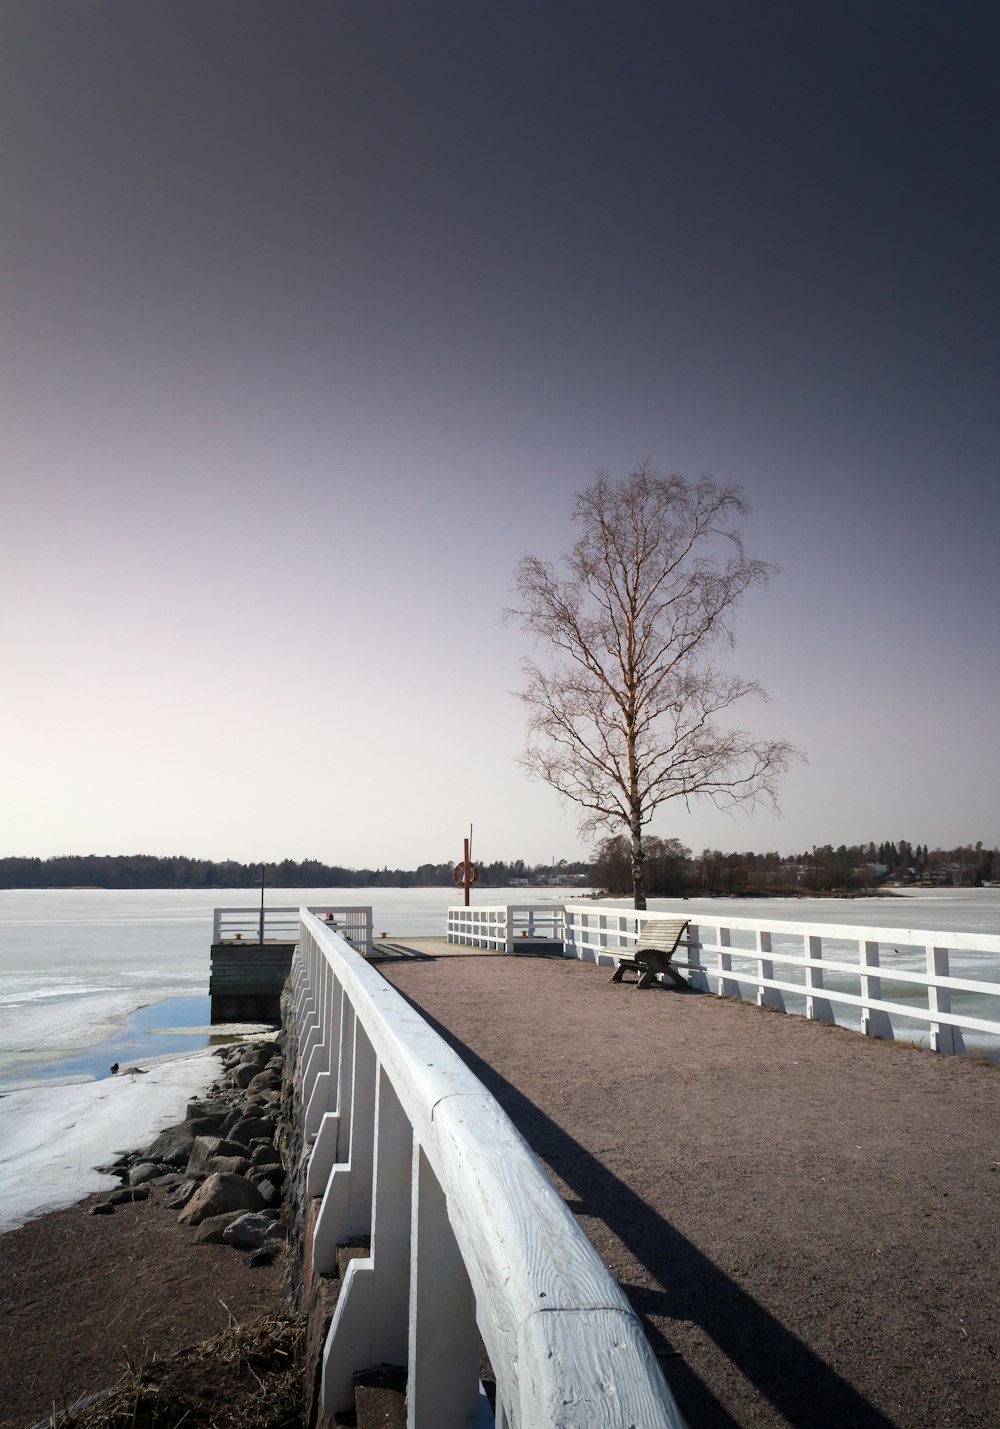 white wooden fence near body of water during daytime